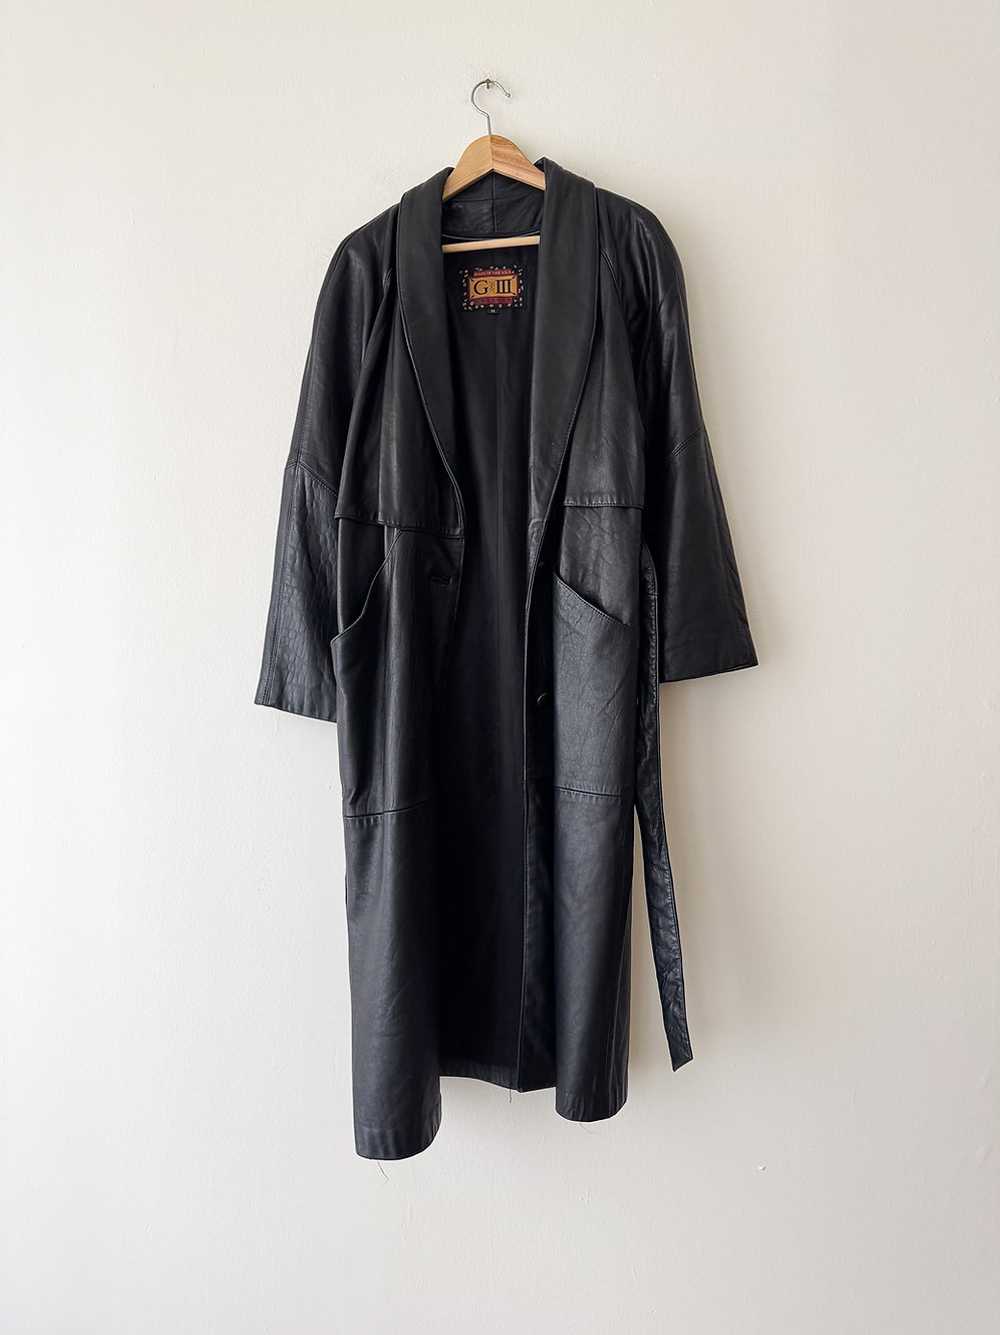 Black Leather Duster - image 4